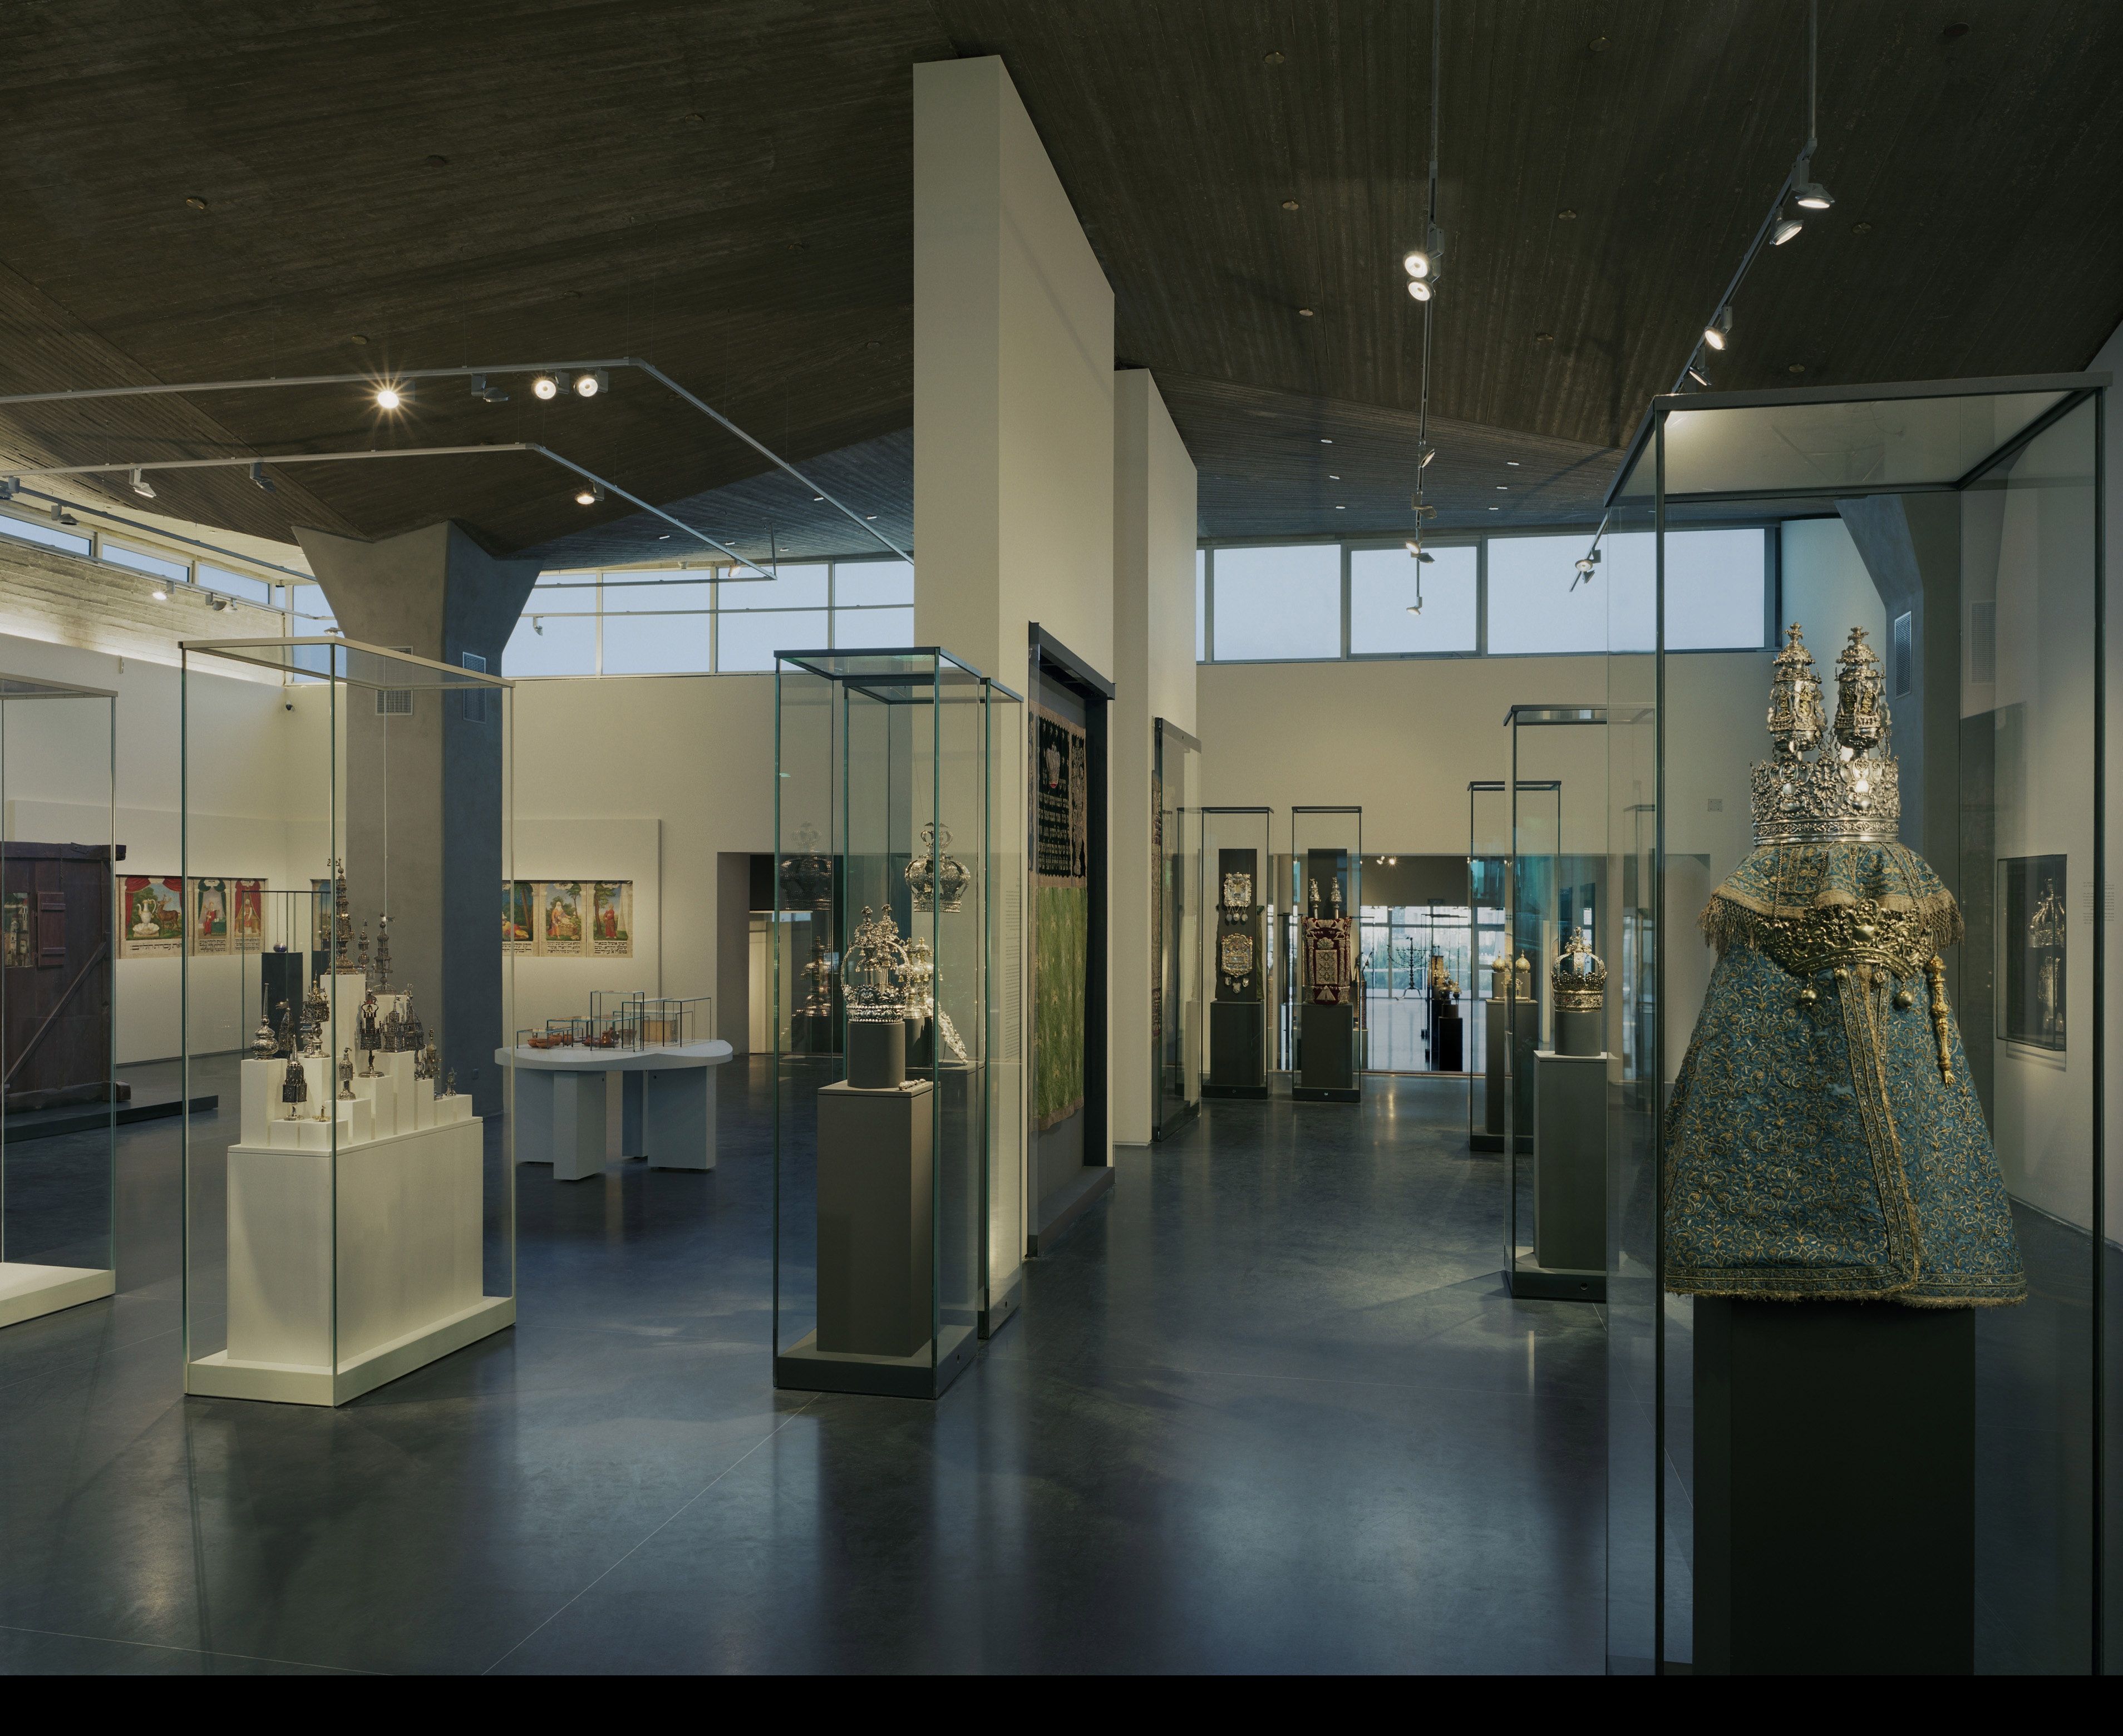 Renewed galleries in the Jack, Joseph, and Morton Mandel Wing for Jewish Art and Life at The Israel Museum, Jerusalem.  (Tim Hursley, courtesy of the Israel Museum, Jerusalem)